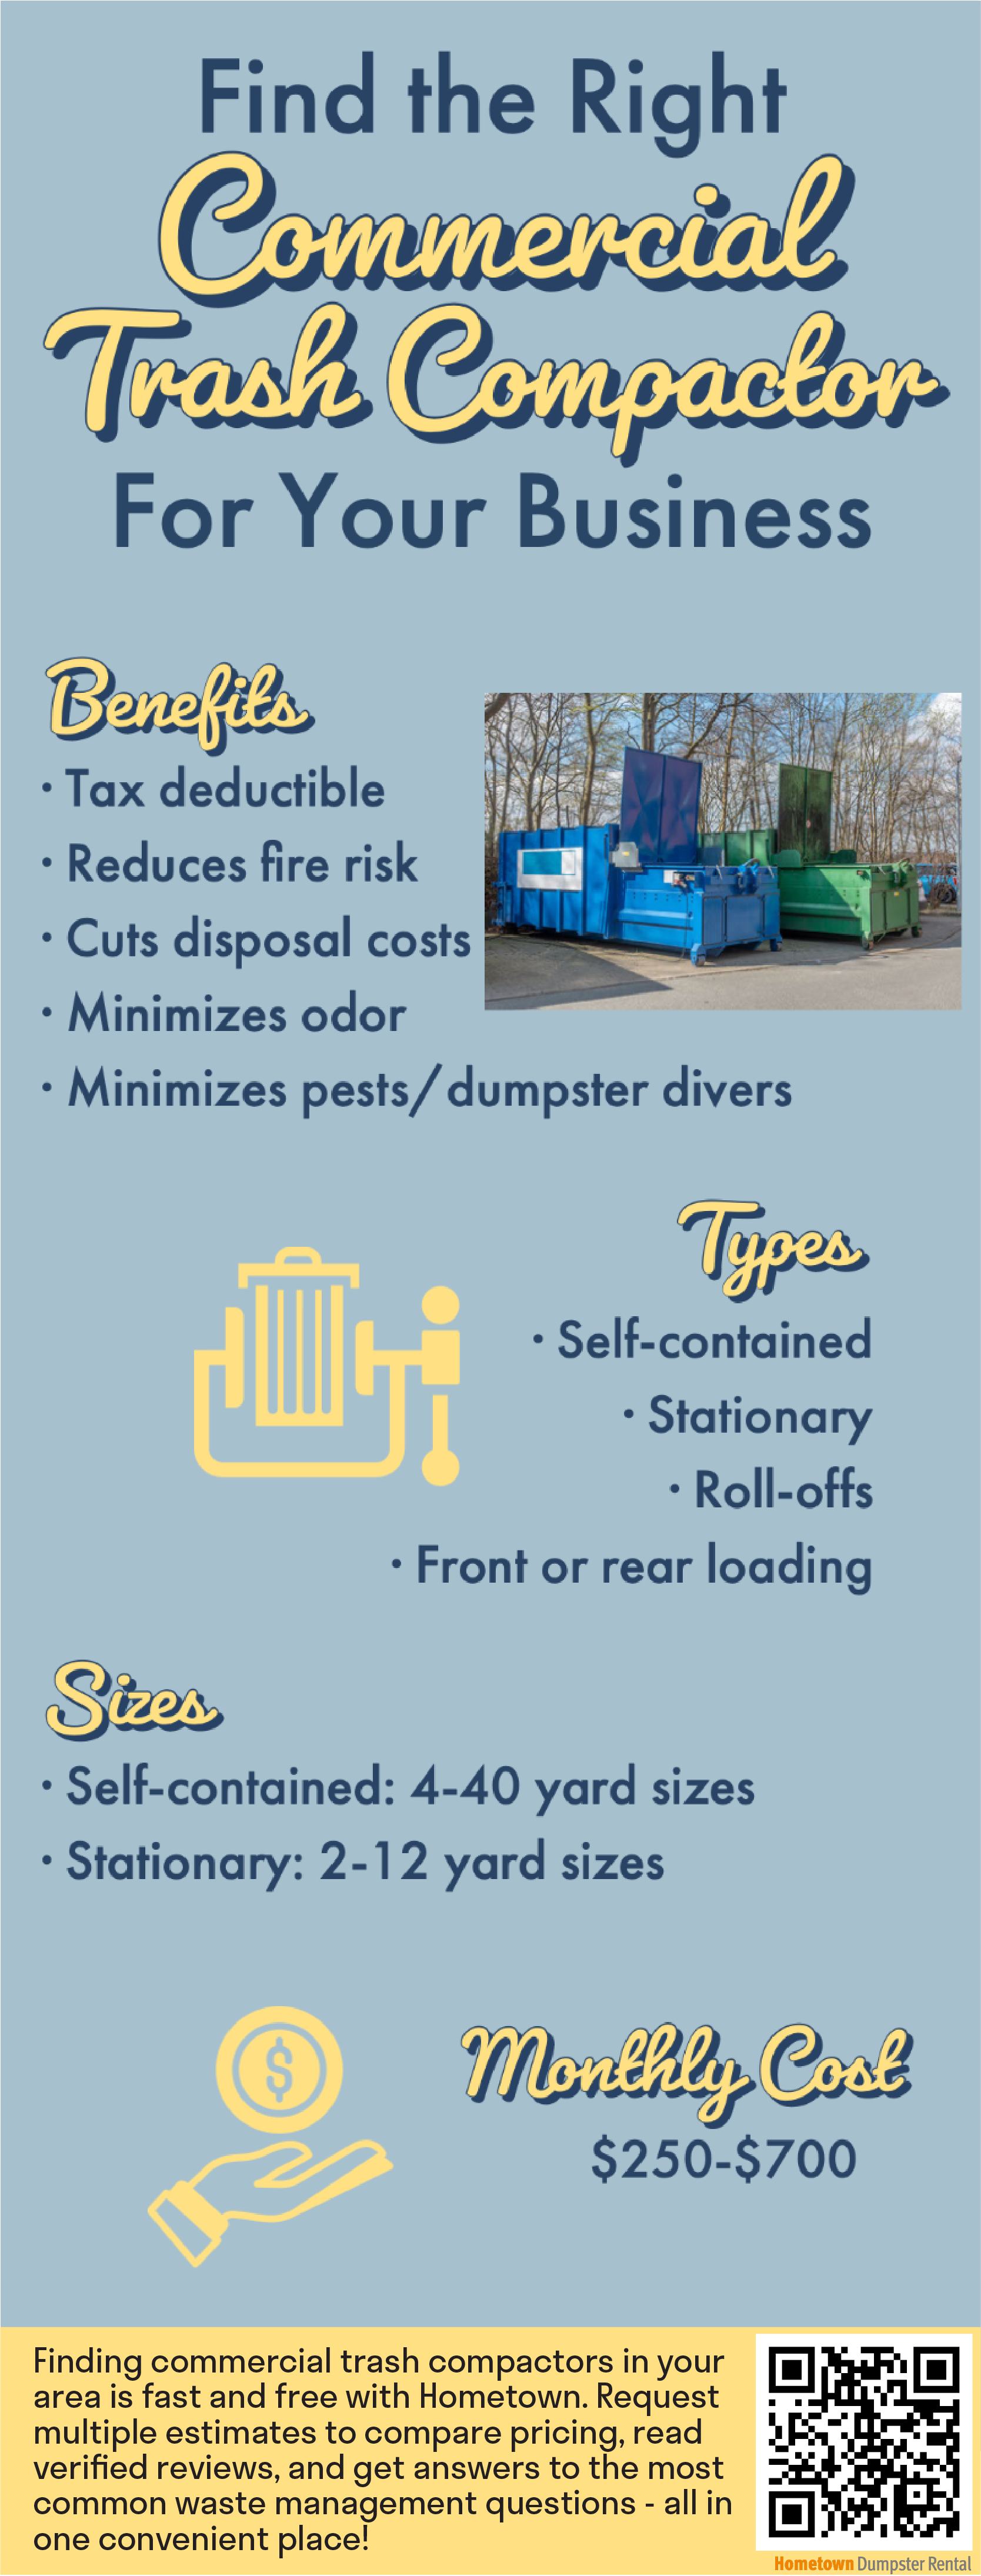 Find the Right Commercial Trash Compactor for Your Business Infographic